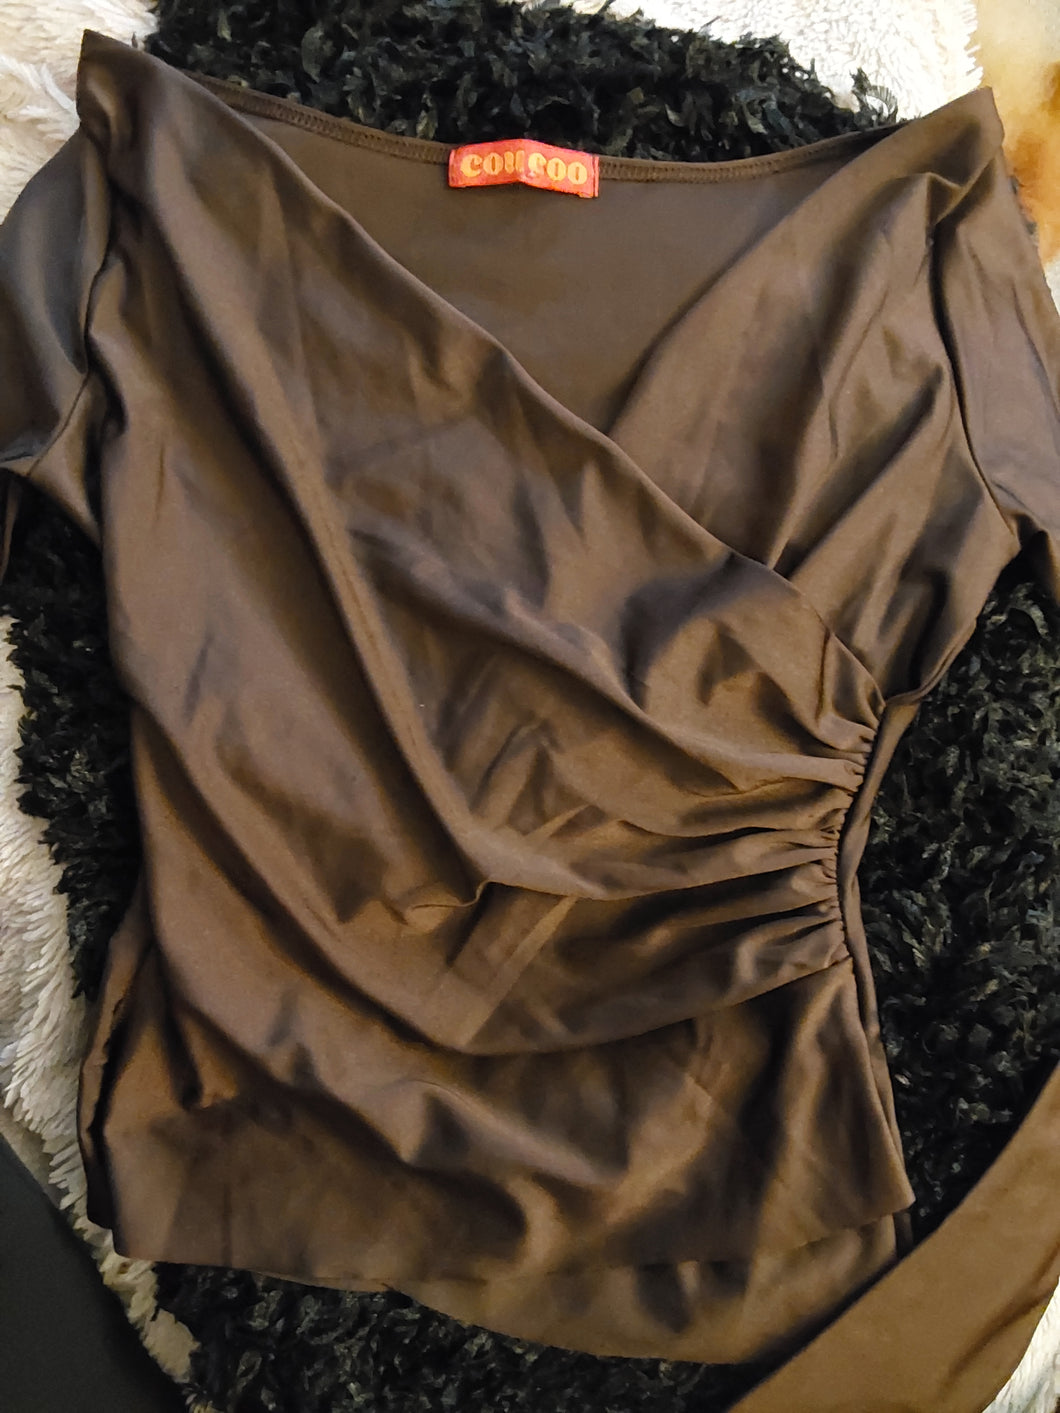 COUCOO LANAI LONG SLEEVED TOP IN CHOCOLATE